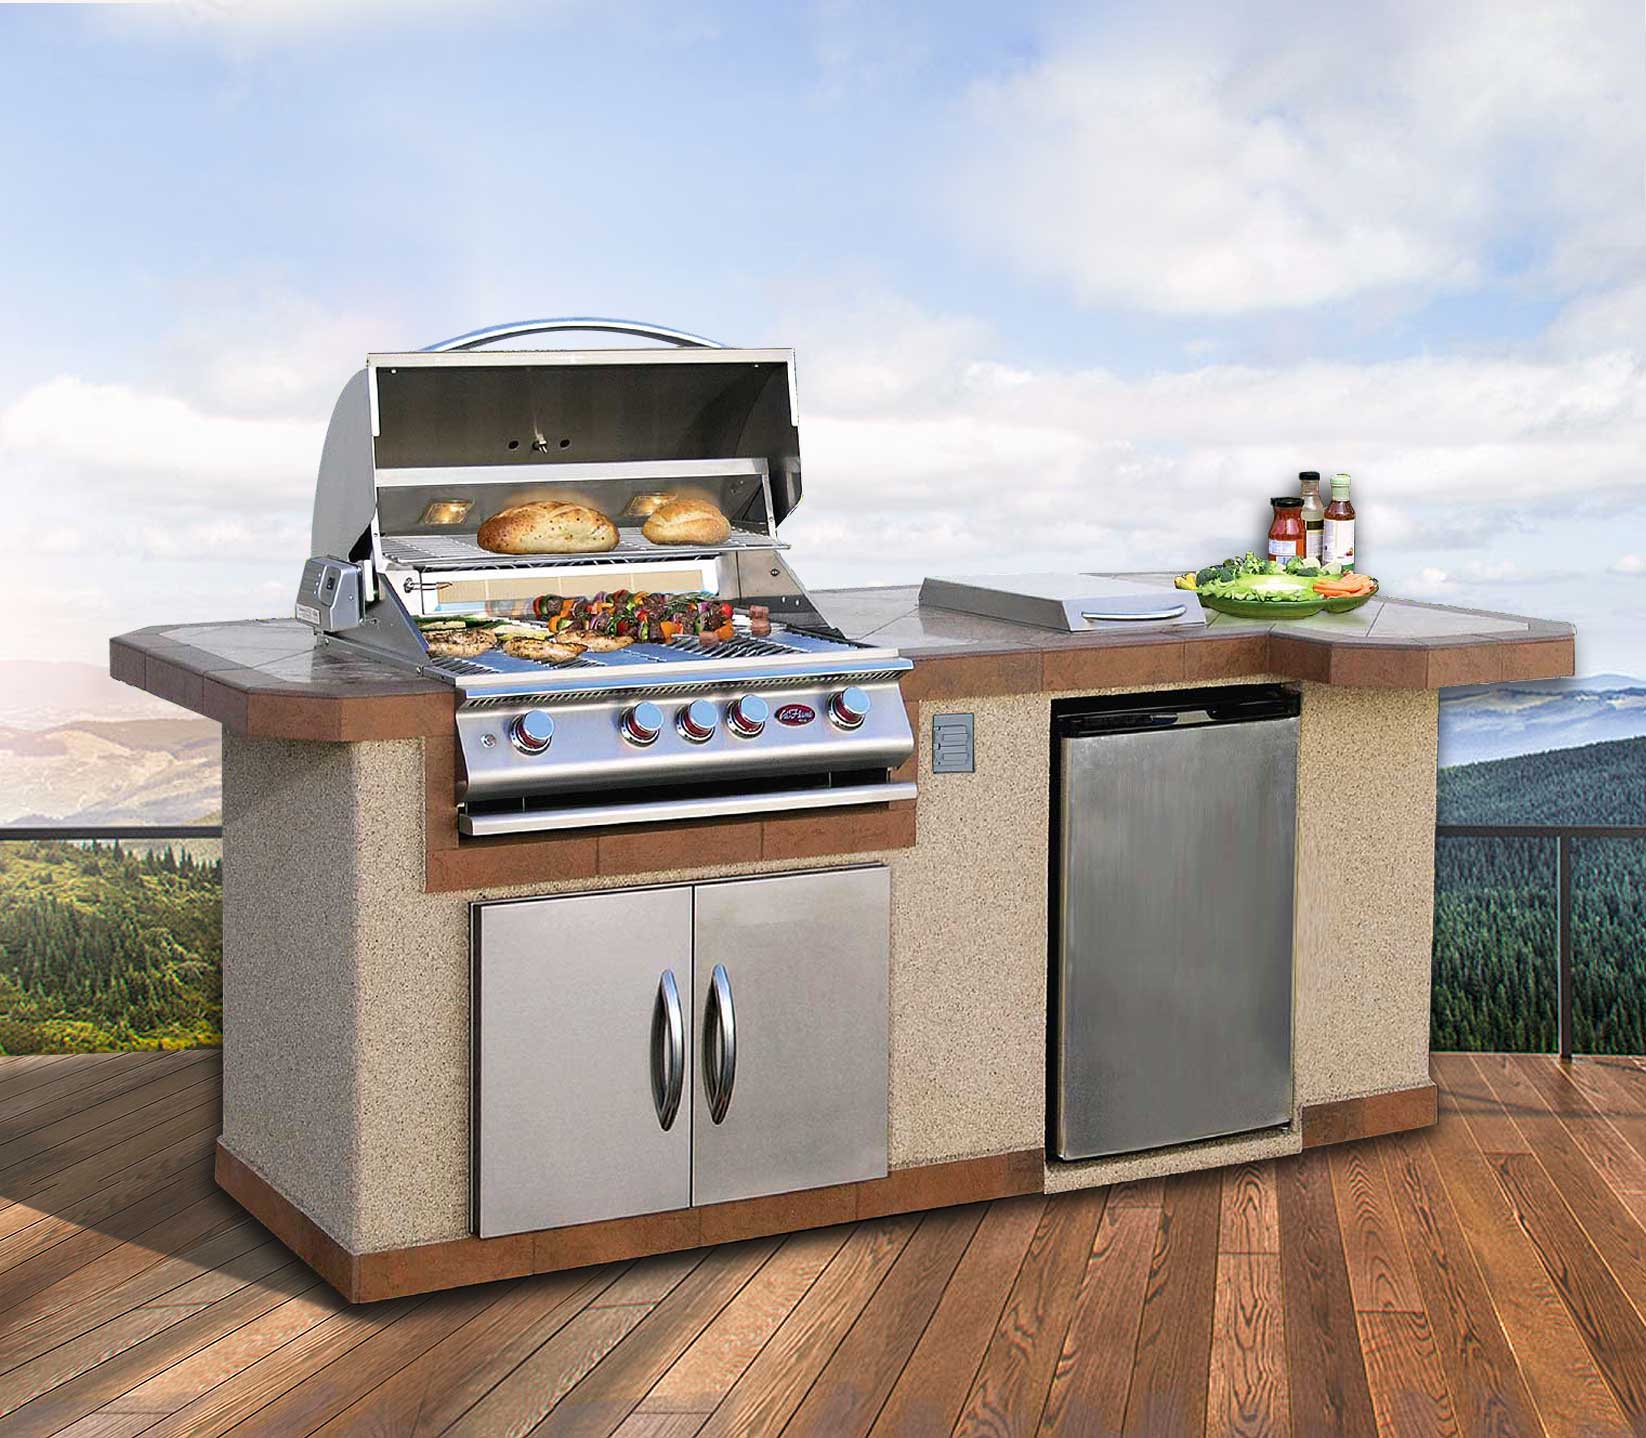 L Shaped Bbq Island With P4 Grill And Refrigerator By Cal Flame Lbk820